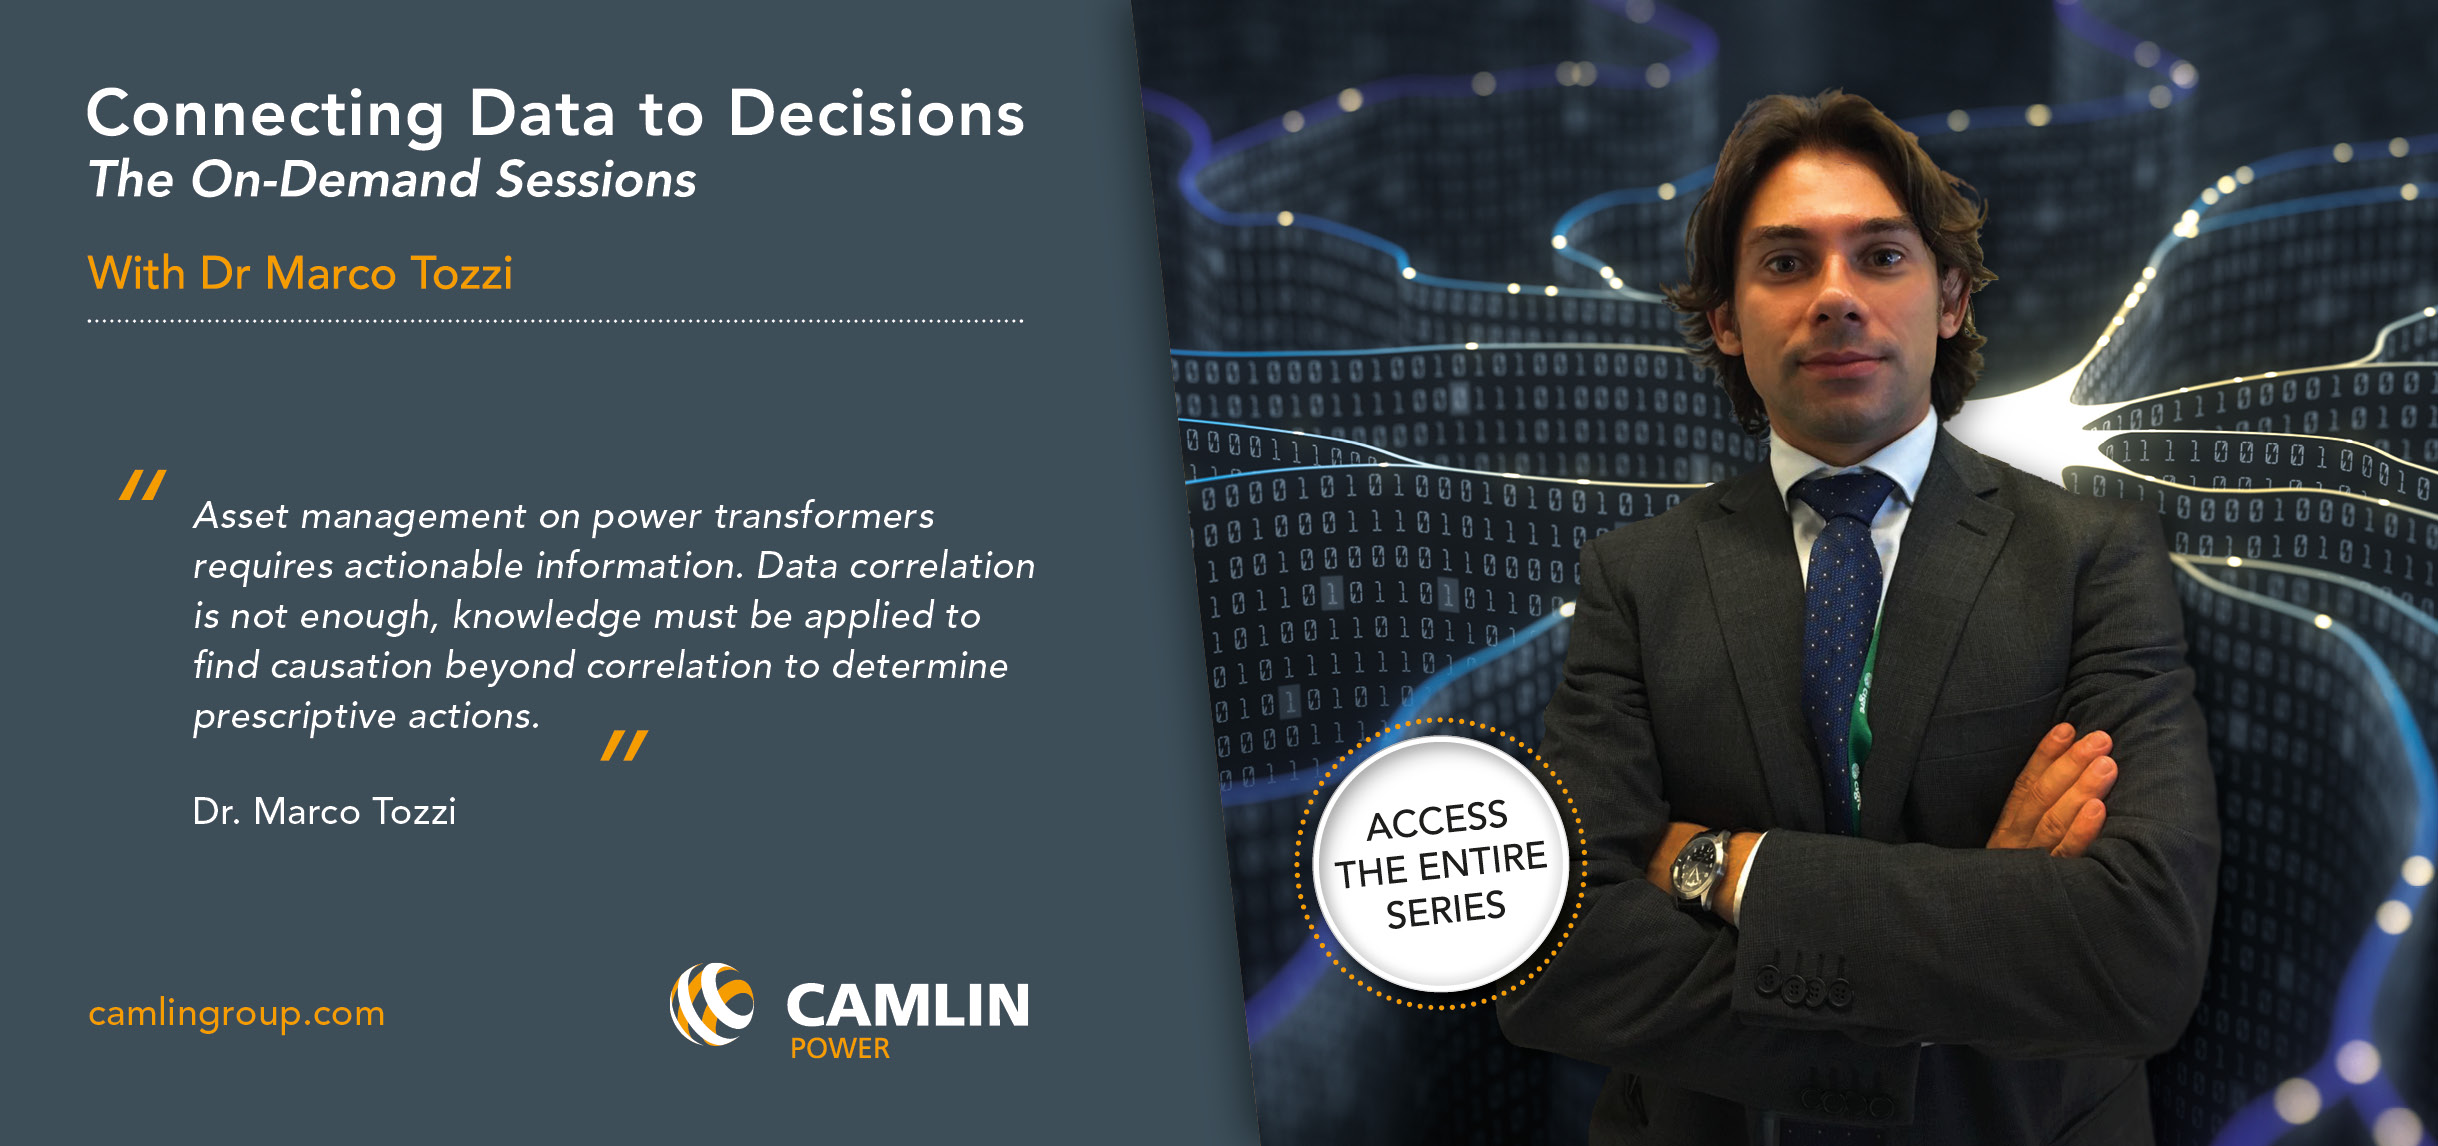 CONNECTING DATA TO DECISIONS THE ON-DEMAND SESSIONS With Dr Marco Tozzi webinar series Camlin Power transformer technology